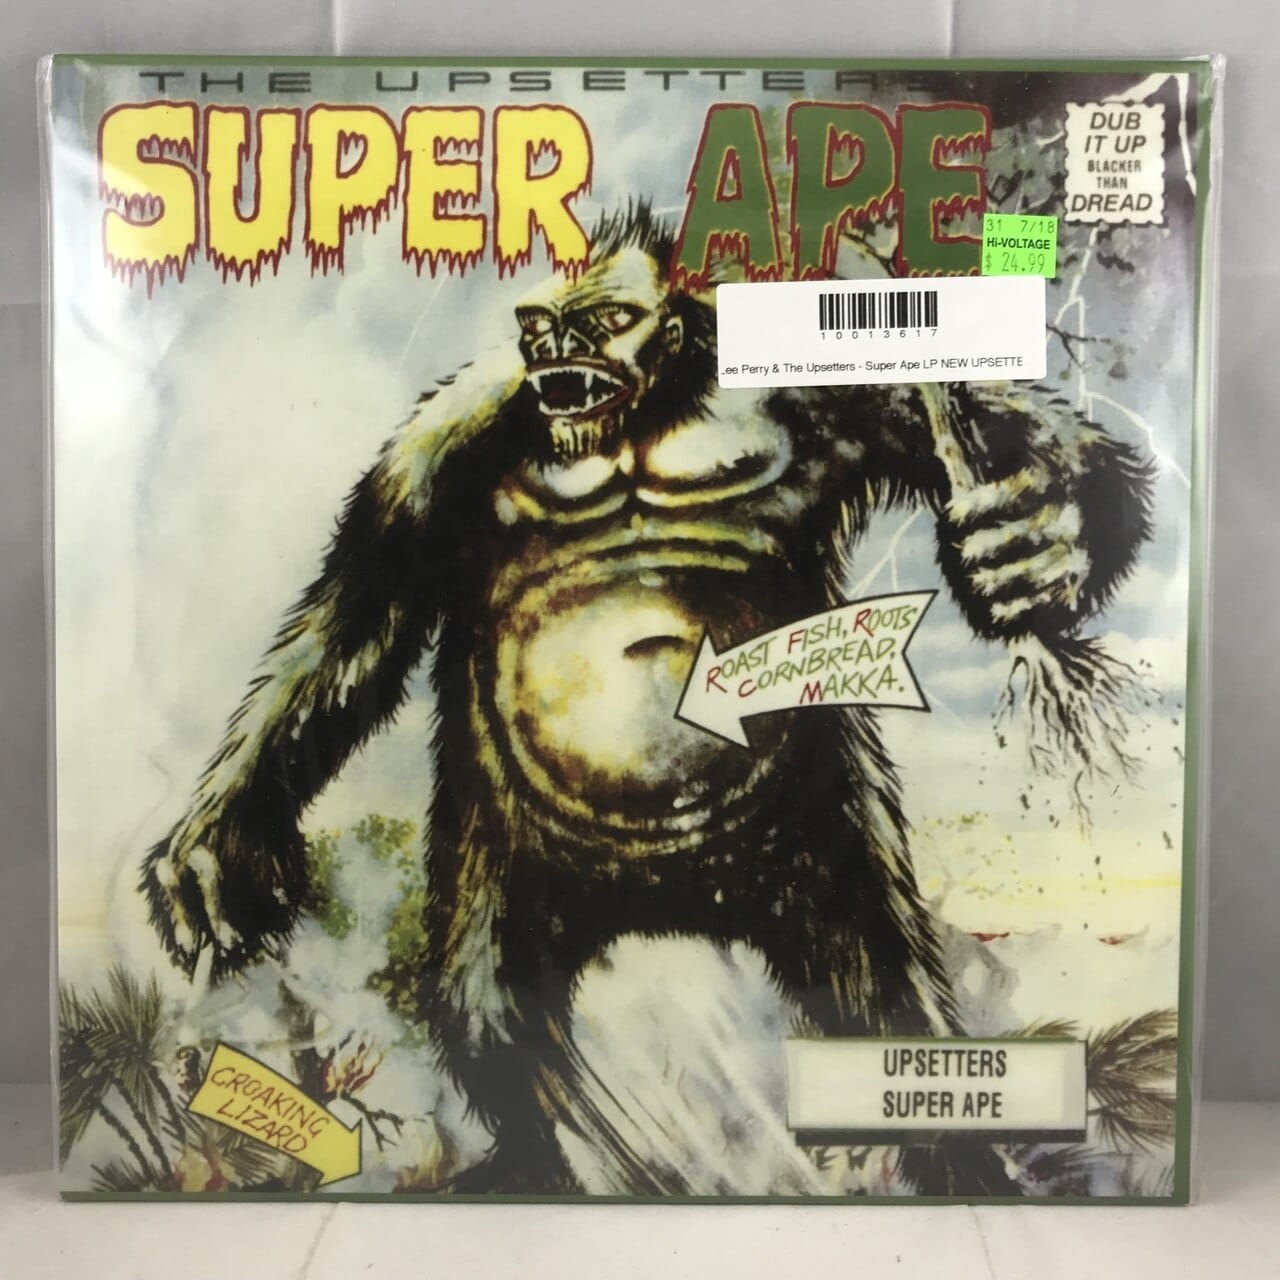 Lee Perry & The Upsetters - Super Ape LP NEW UPSETTER